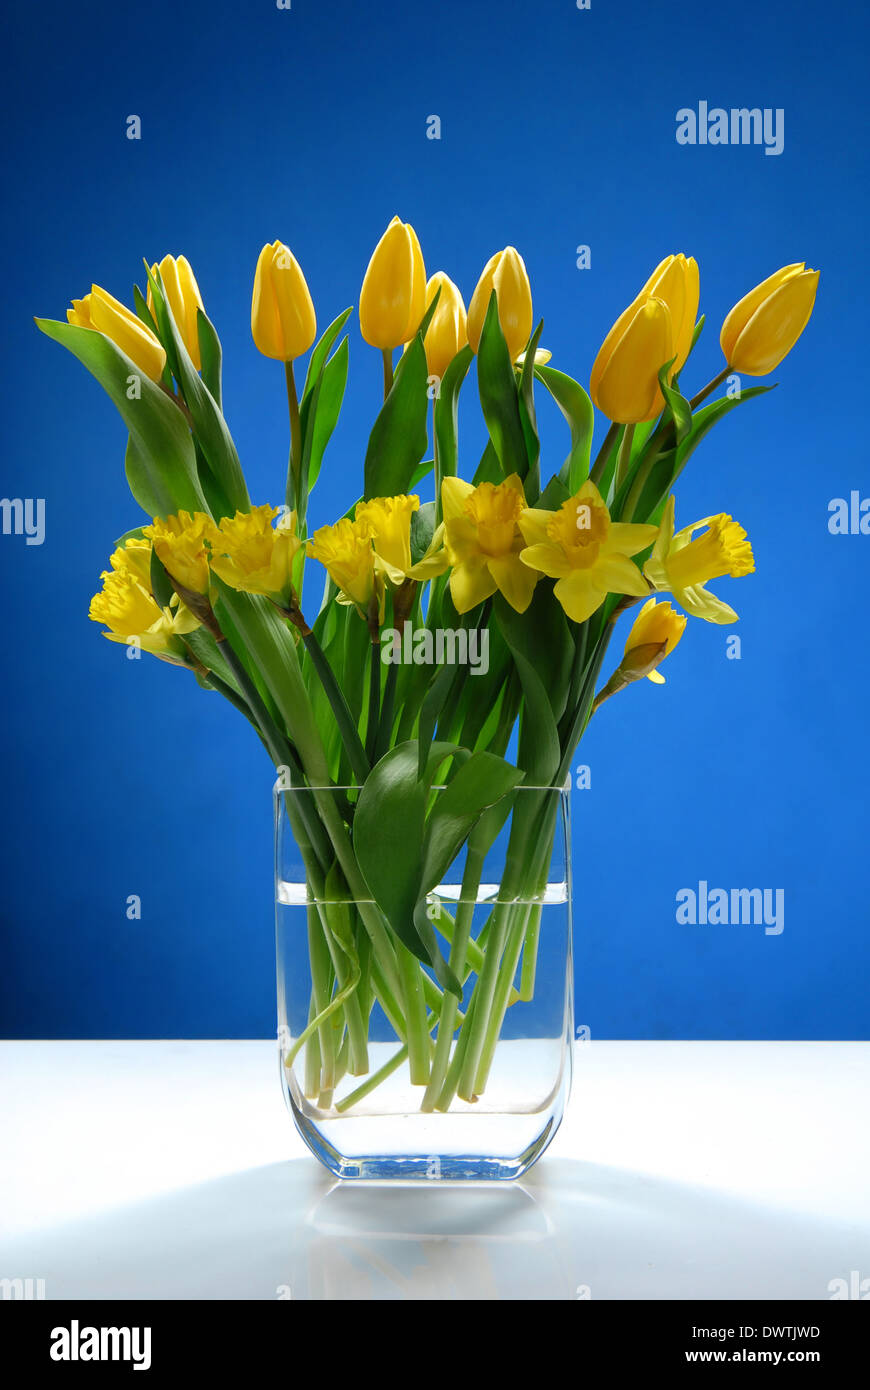 A bouquet of yellow flowers with green leaves Stock Photo